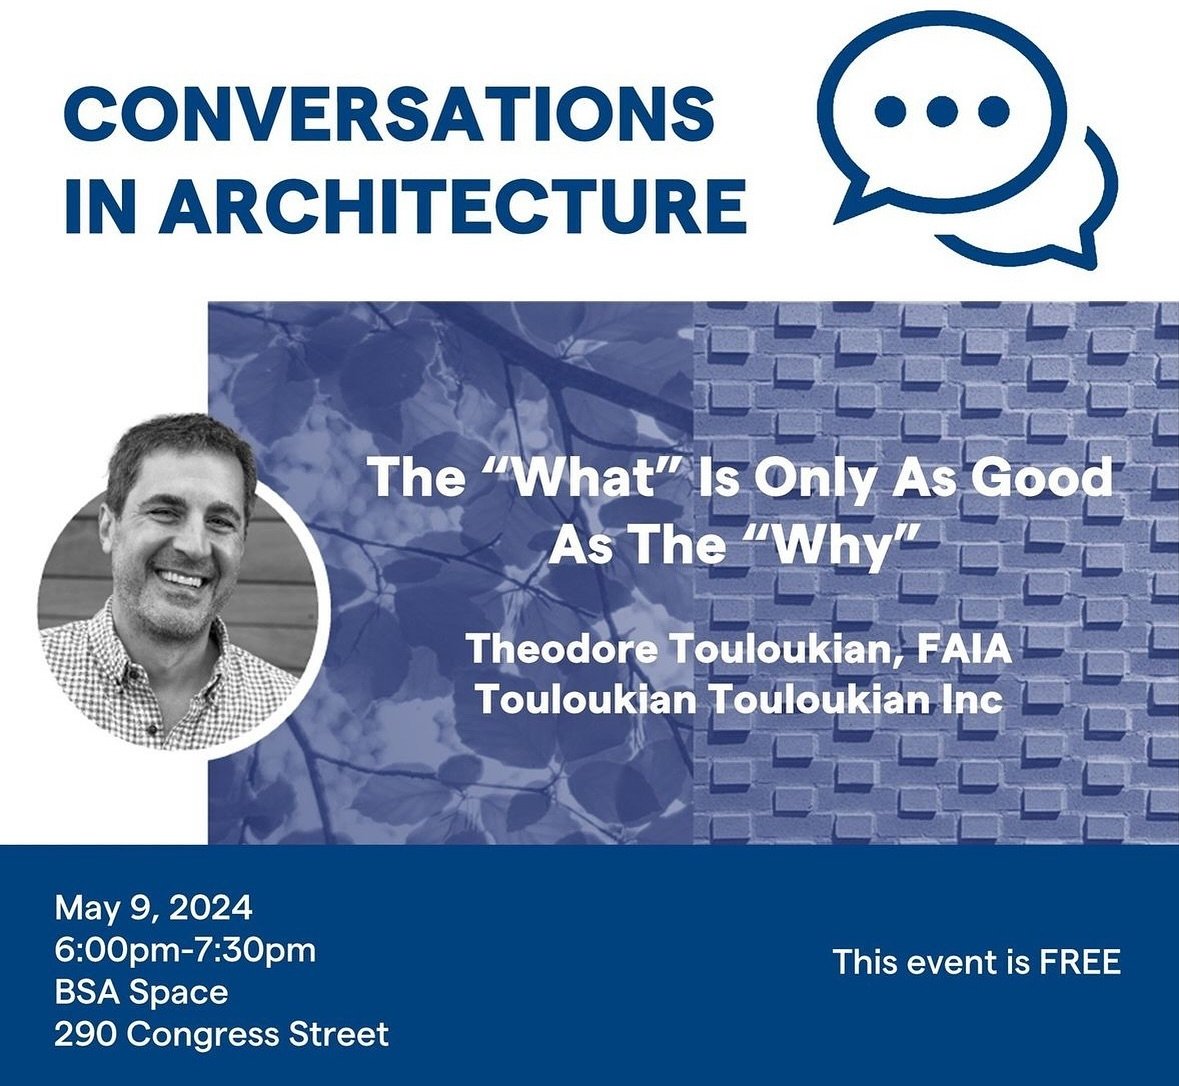 As a part of the BSA&rsquo;s Conversations in Architecture series, Ted will be giving a lecture entitled:

The &ldquo;What&rdquo; is Only As Good As The &ldquo;Why&rdquo;

Join us from 6:00pm-7:30pm next Thursday, May 9th at the BSA Space (290 Congre